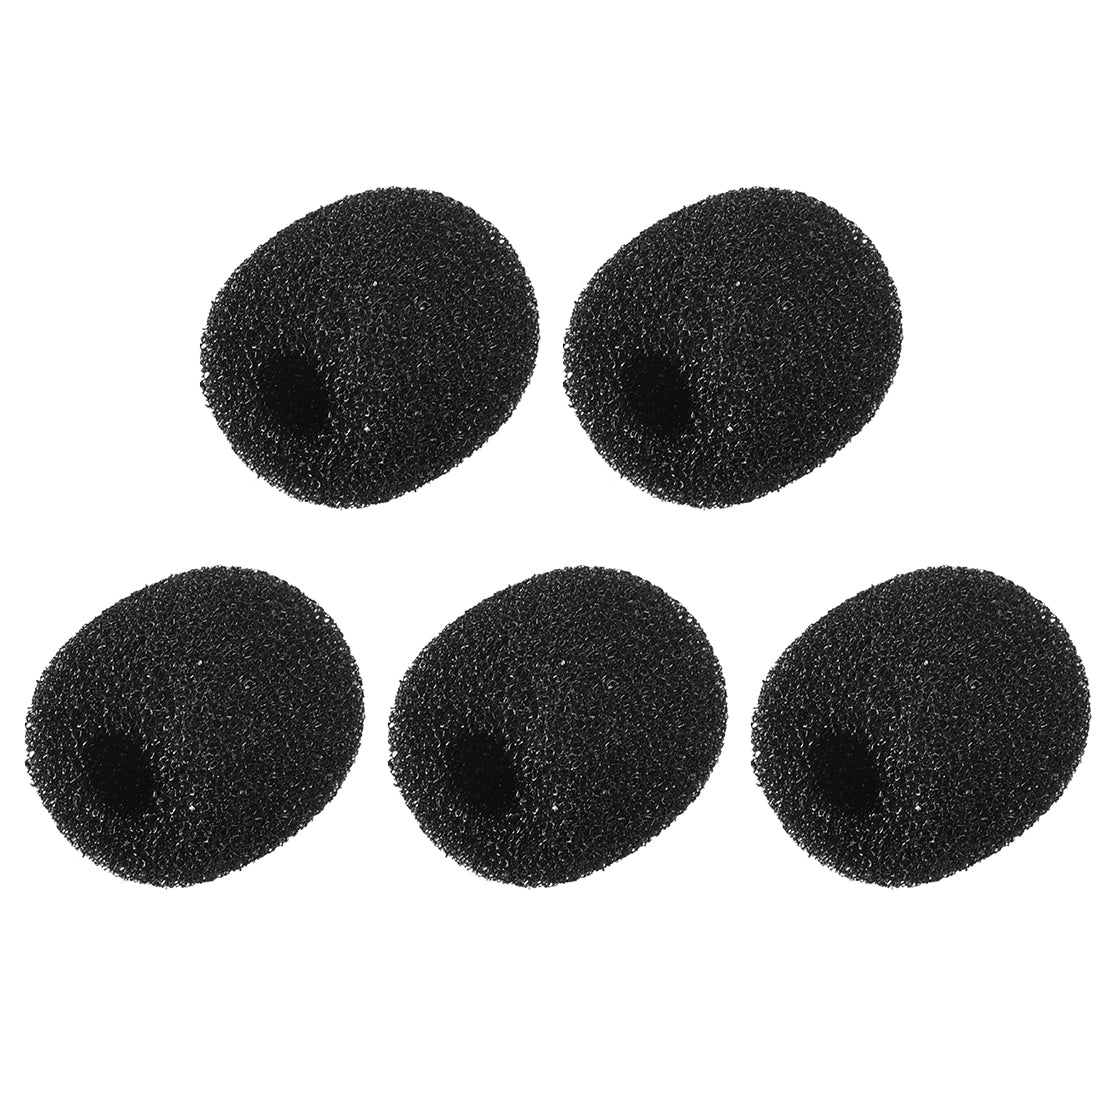 uxcell Uxcell 5PCS Foam Mic Cover Headset Microphone Windscreen Shield Protection 17mm Length for Headset Lapel Lavalier